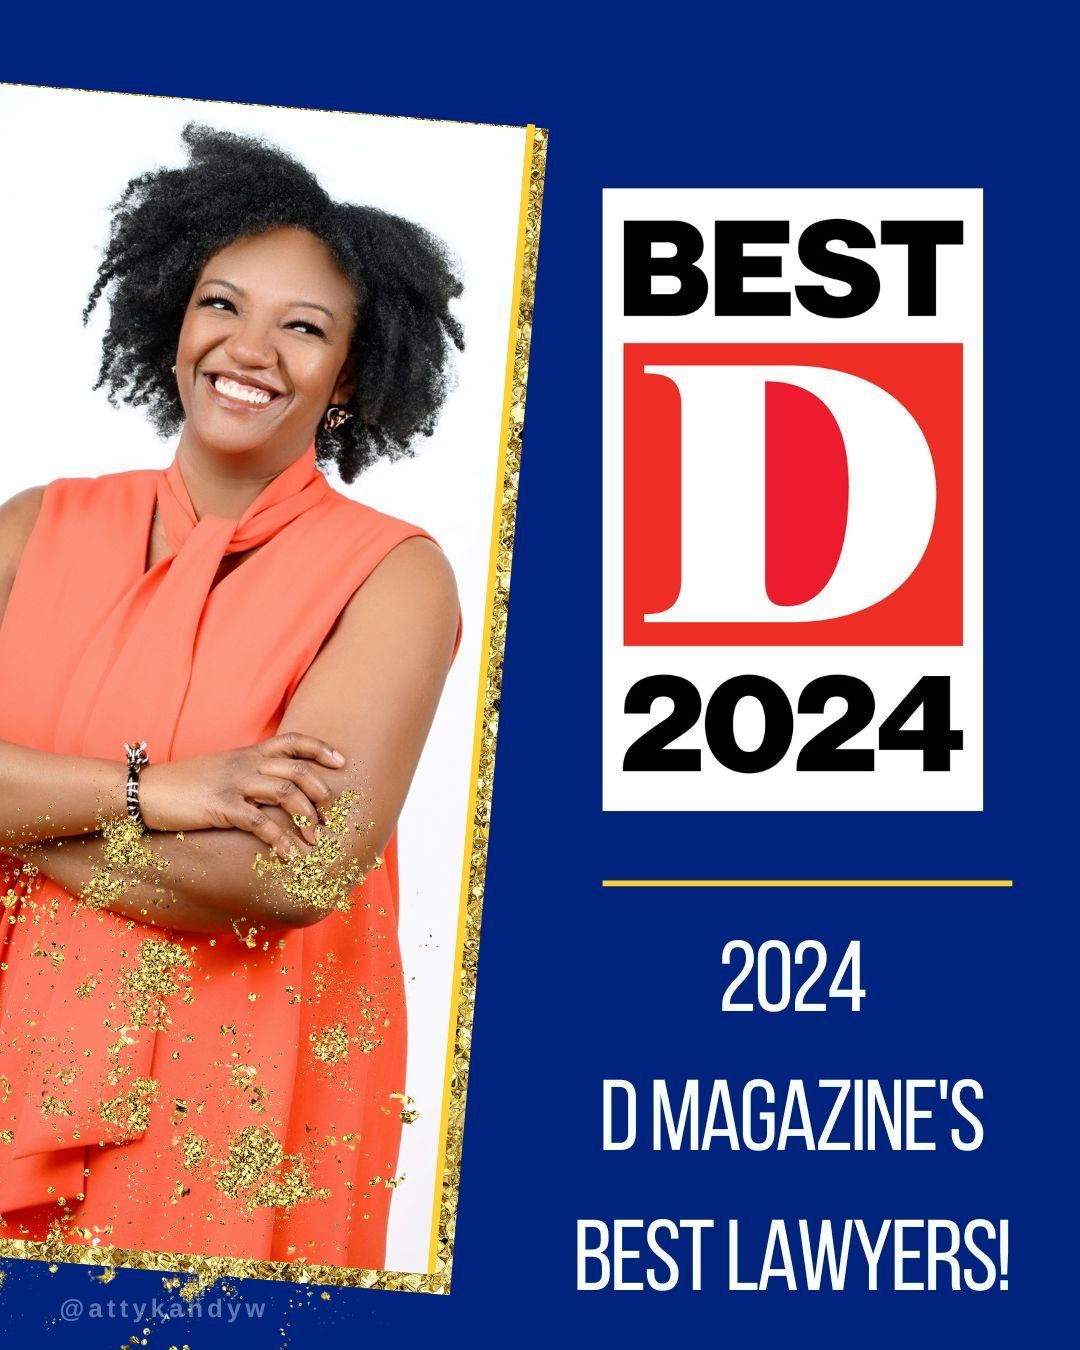 Thank you, Dallas! 
Being named one of the Top Attorneys for 2024 is an absolute honor.
The newest issue of D Magazine hits stands on Thursday, April 25th. Check us out!

#WalterLegal #IPLaw #womenattorneys #DallasAttorneys #minoritybusinessowner #wo